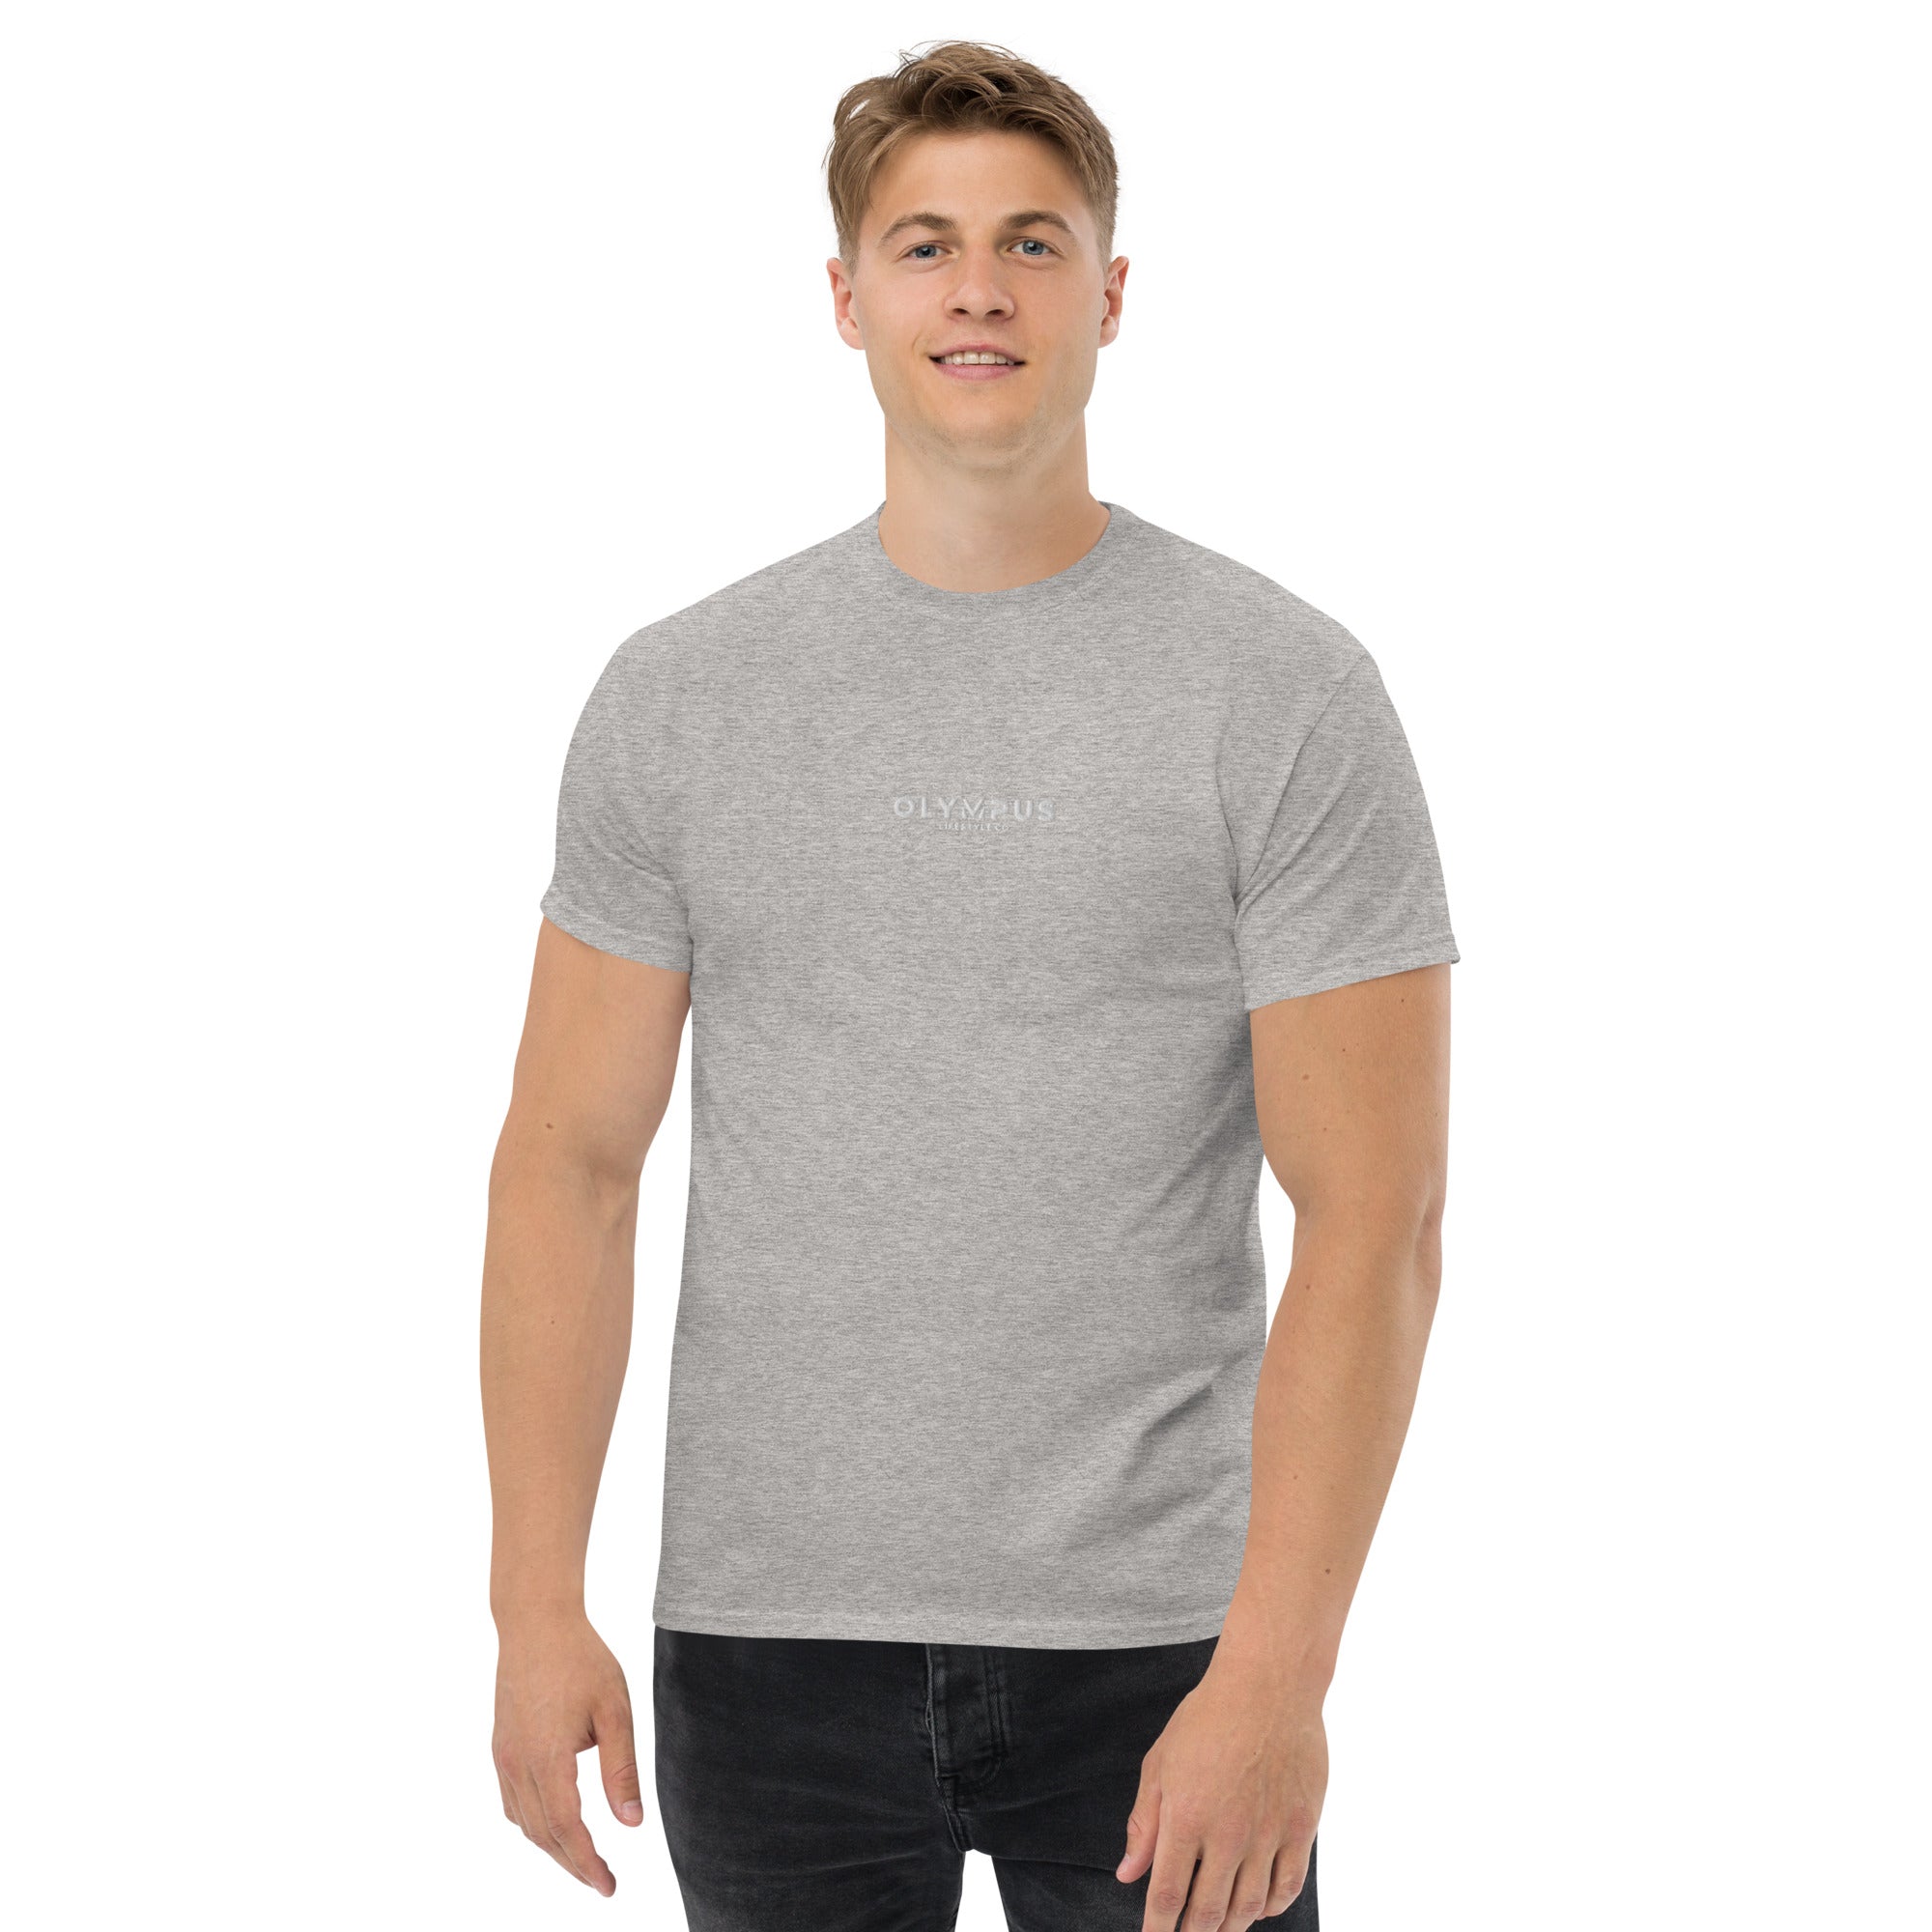 Olympus Men's Embroidered T-Shirt White Text Logo